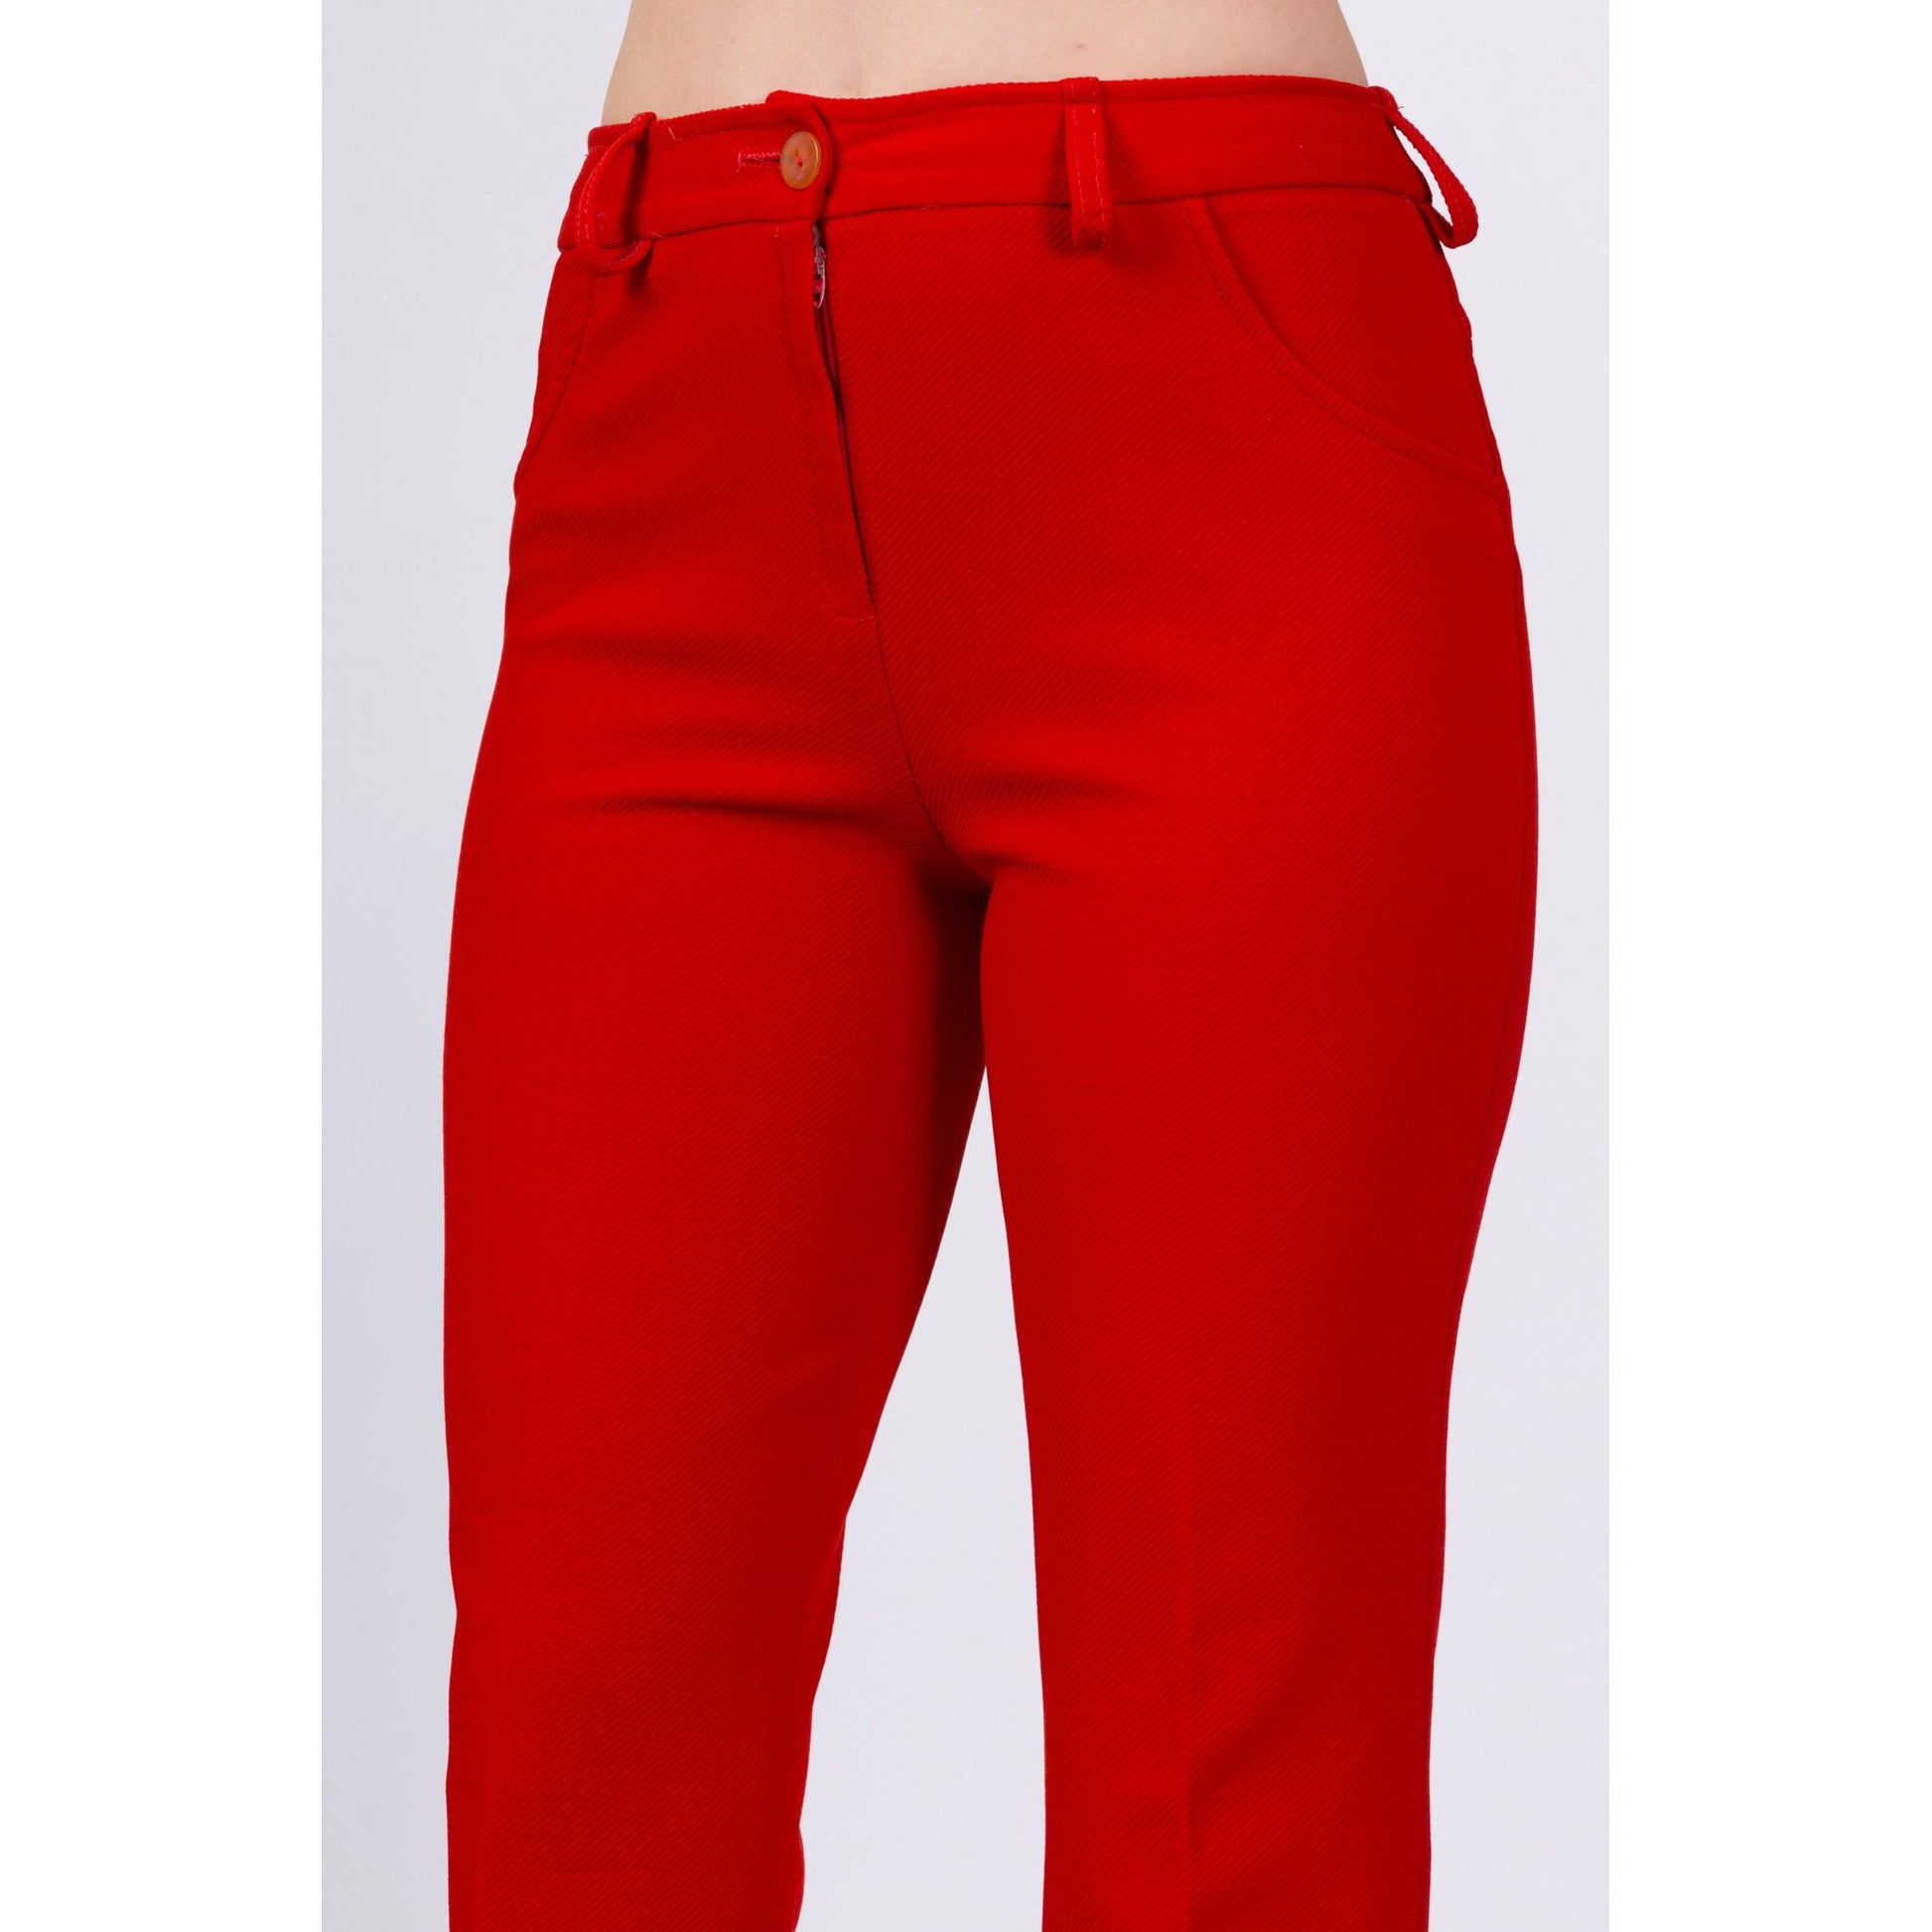 70s Red Mid-Rise Pants - Men's XS, Women's Small 